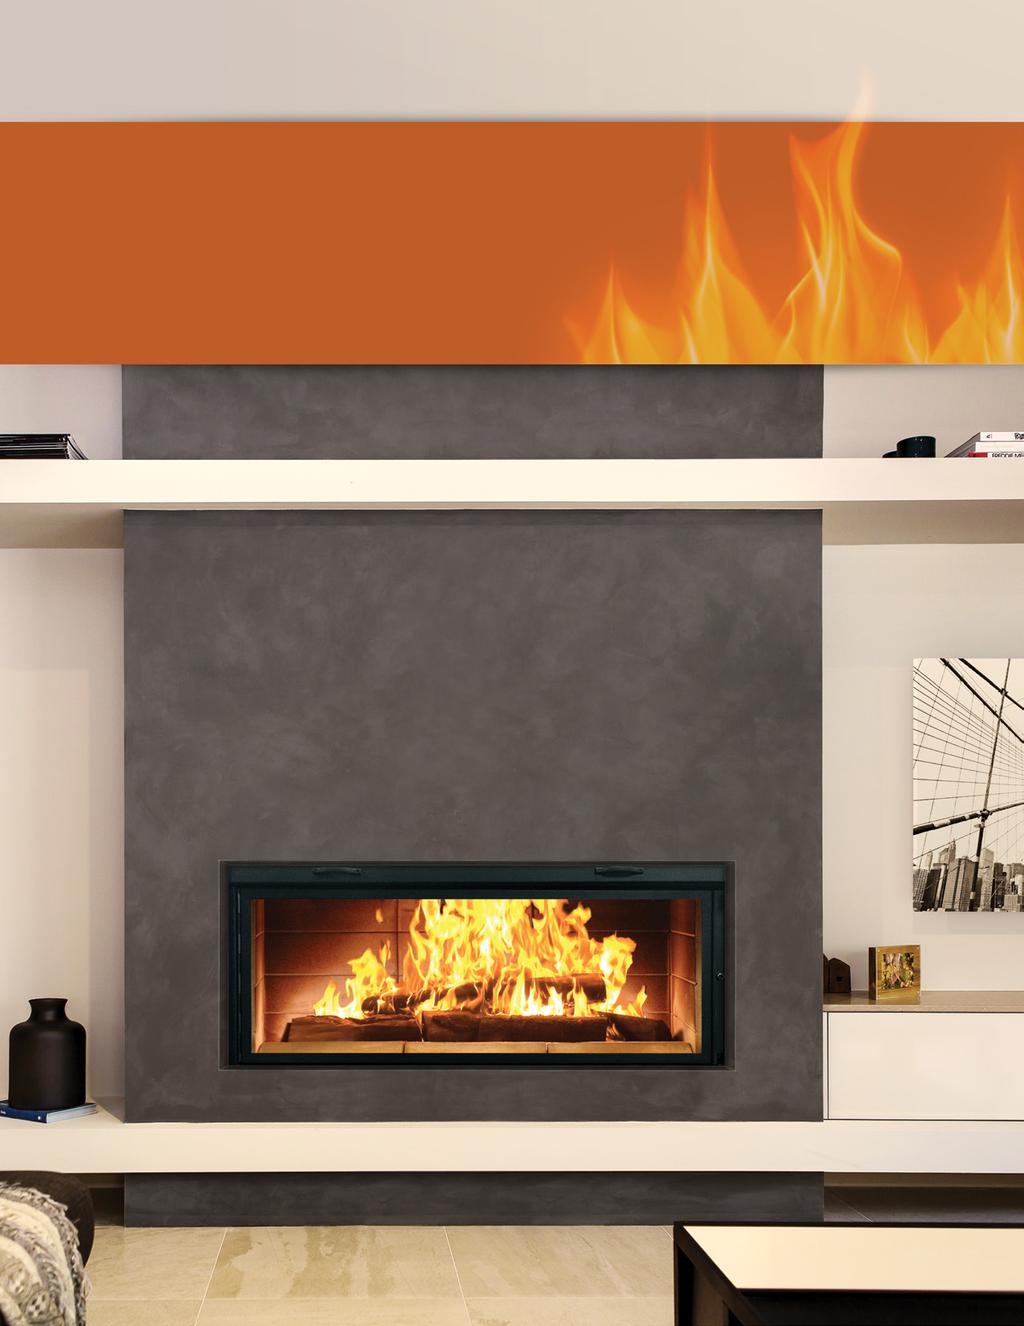 Title Linear 50 Contemporary wood-burning at its finest. At 50" wide, the wall-to-wall fire of the L50 is an experience unlike any other.